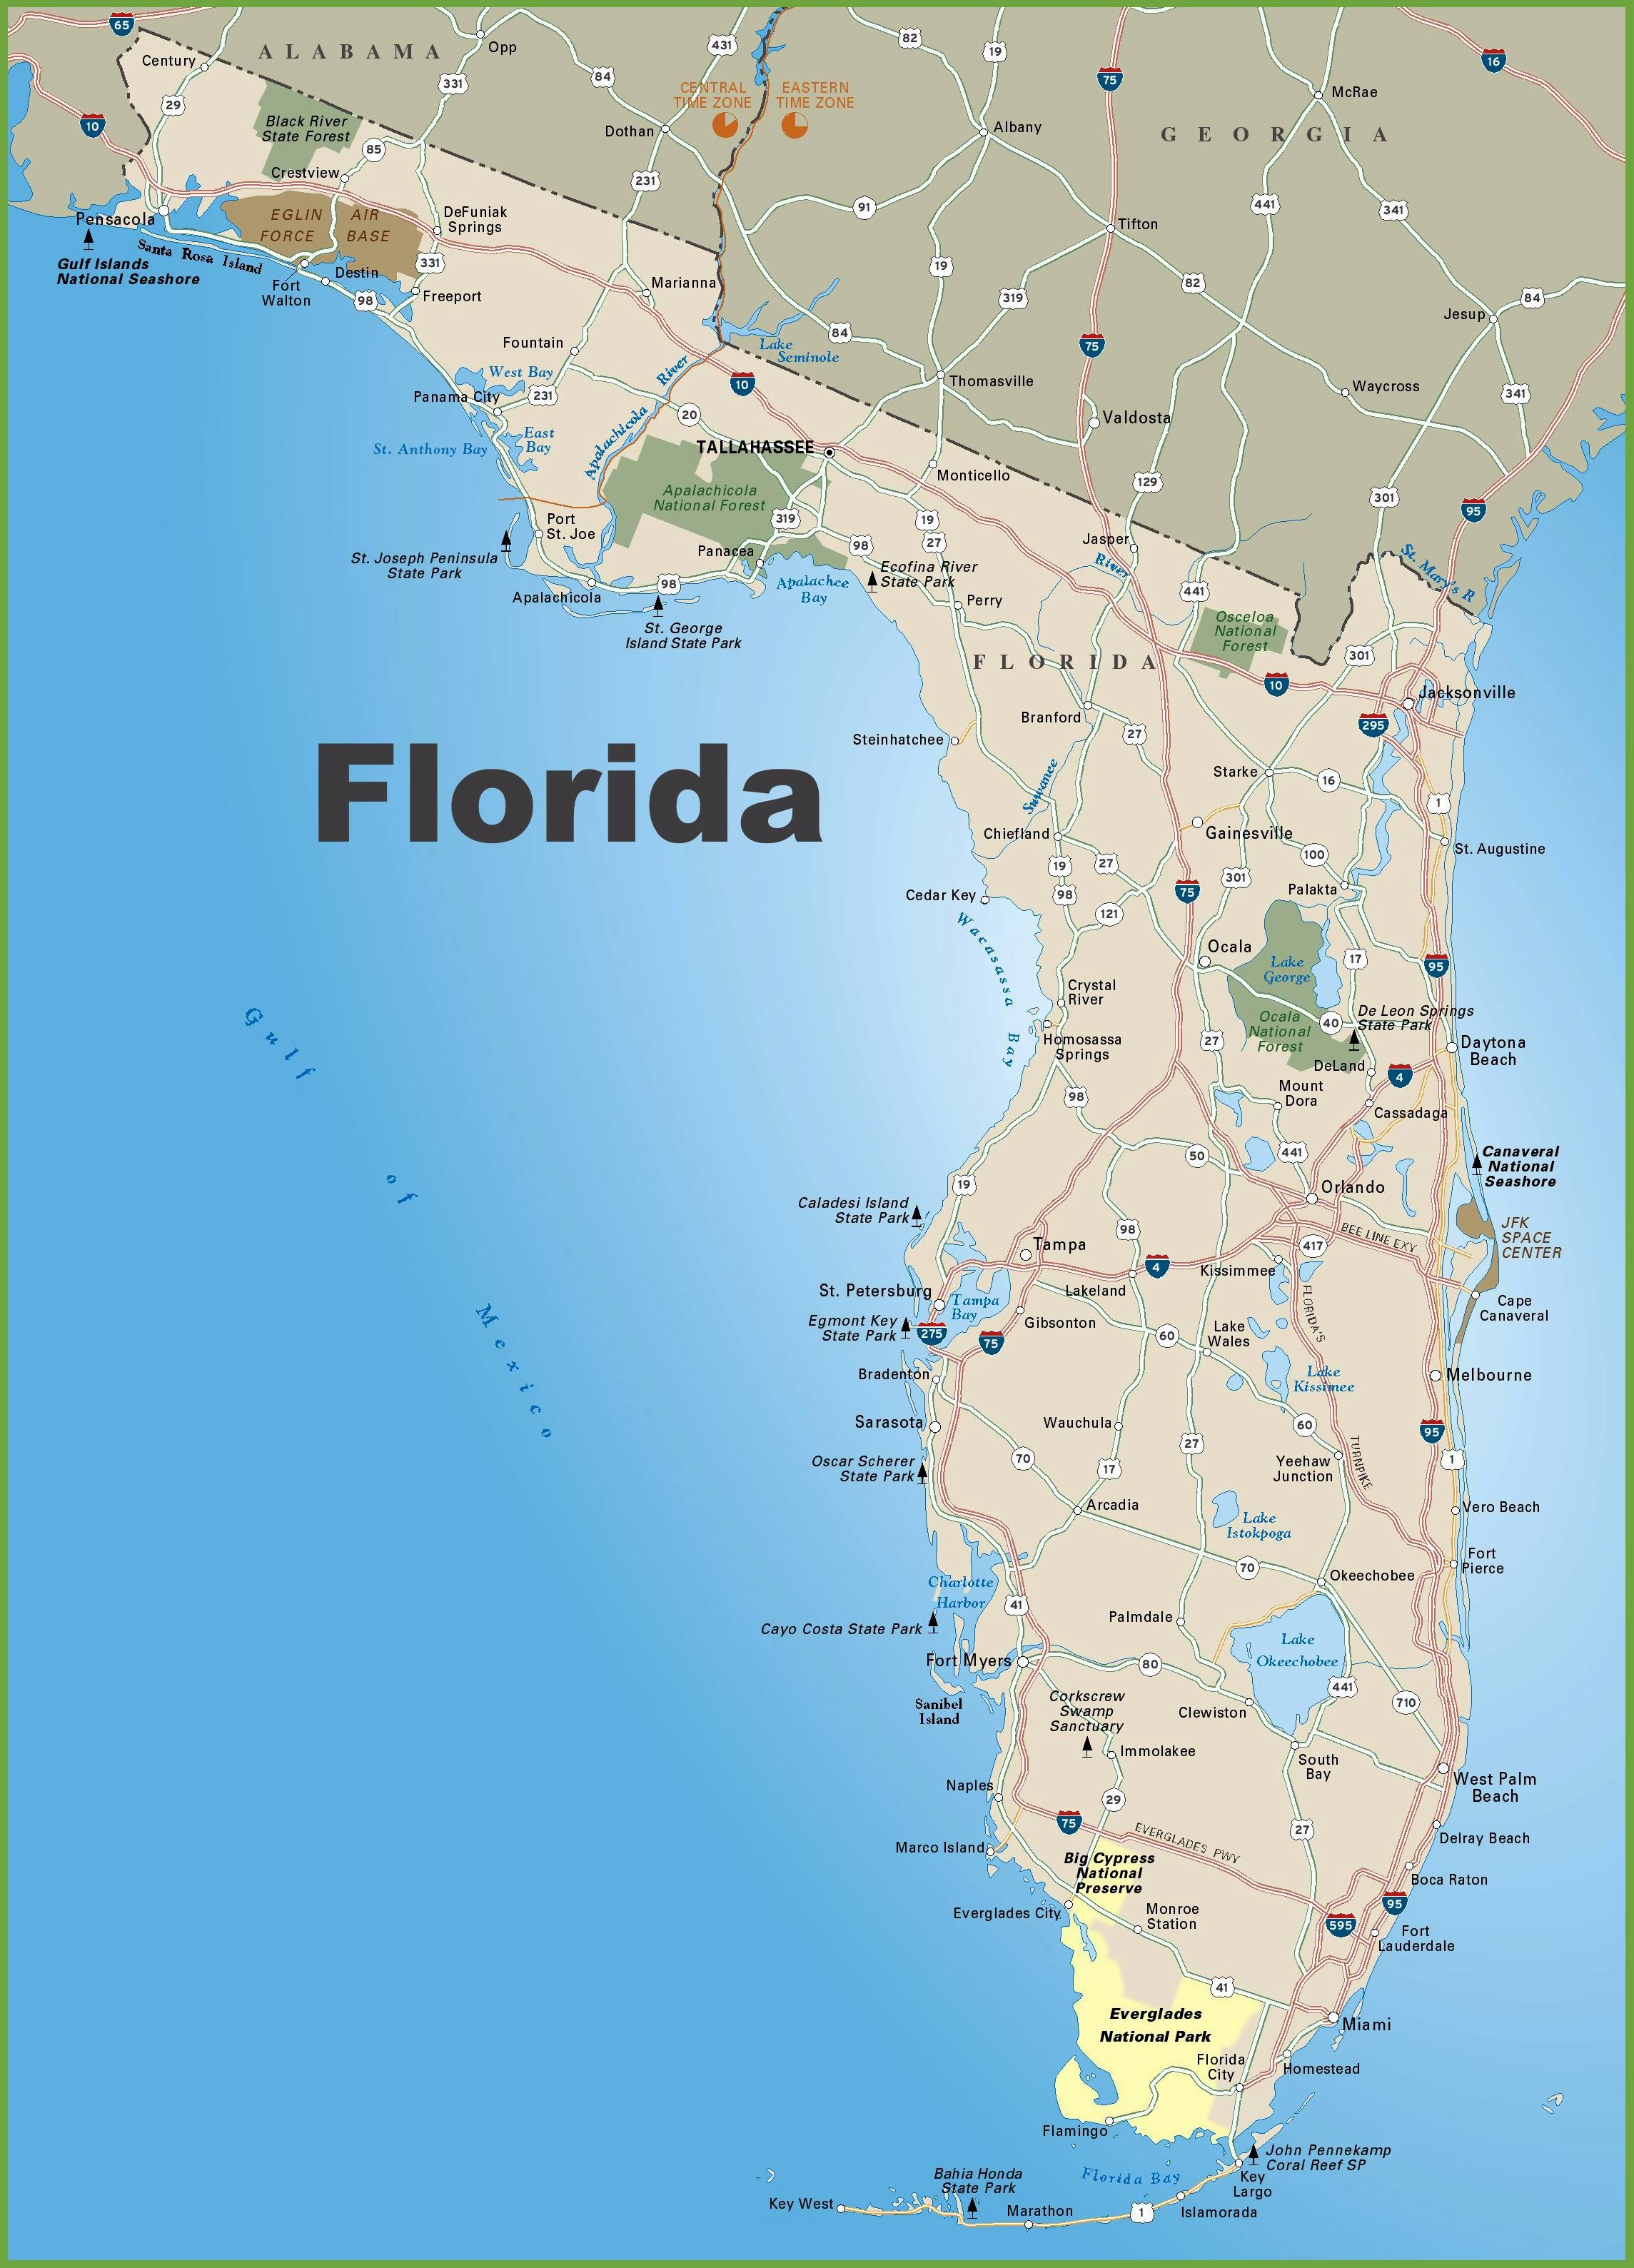 Large Florida Maps For Free Download And Print | High-Resolution And - Google Maps Clearwater Beach Florida